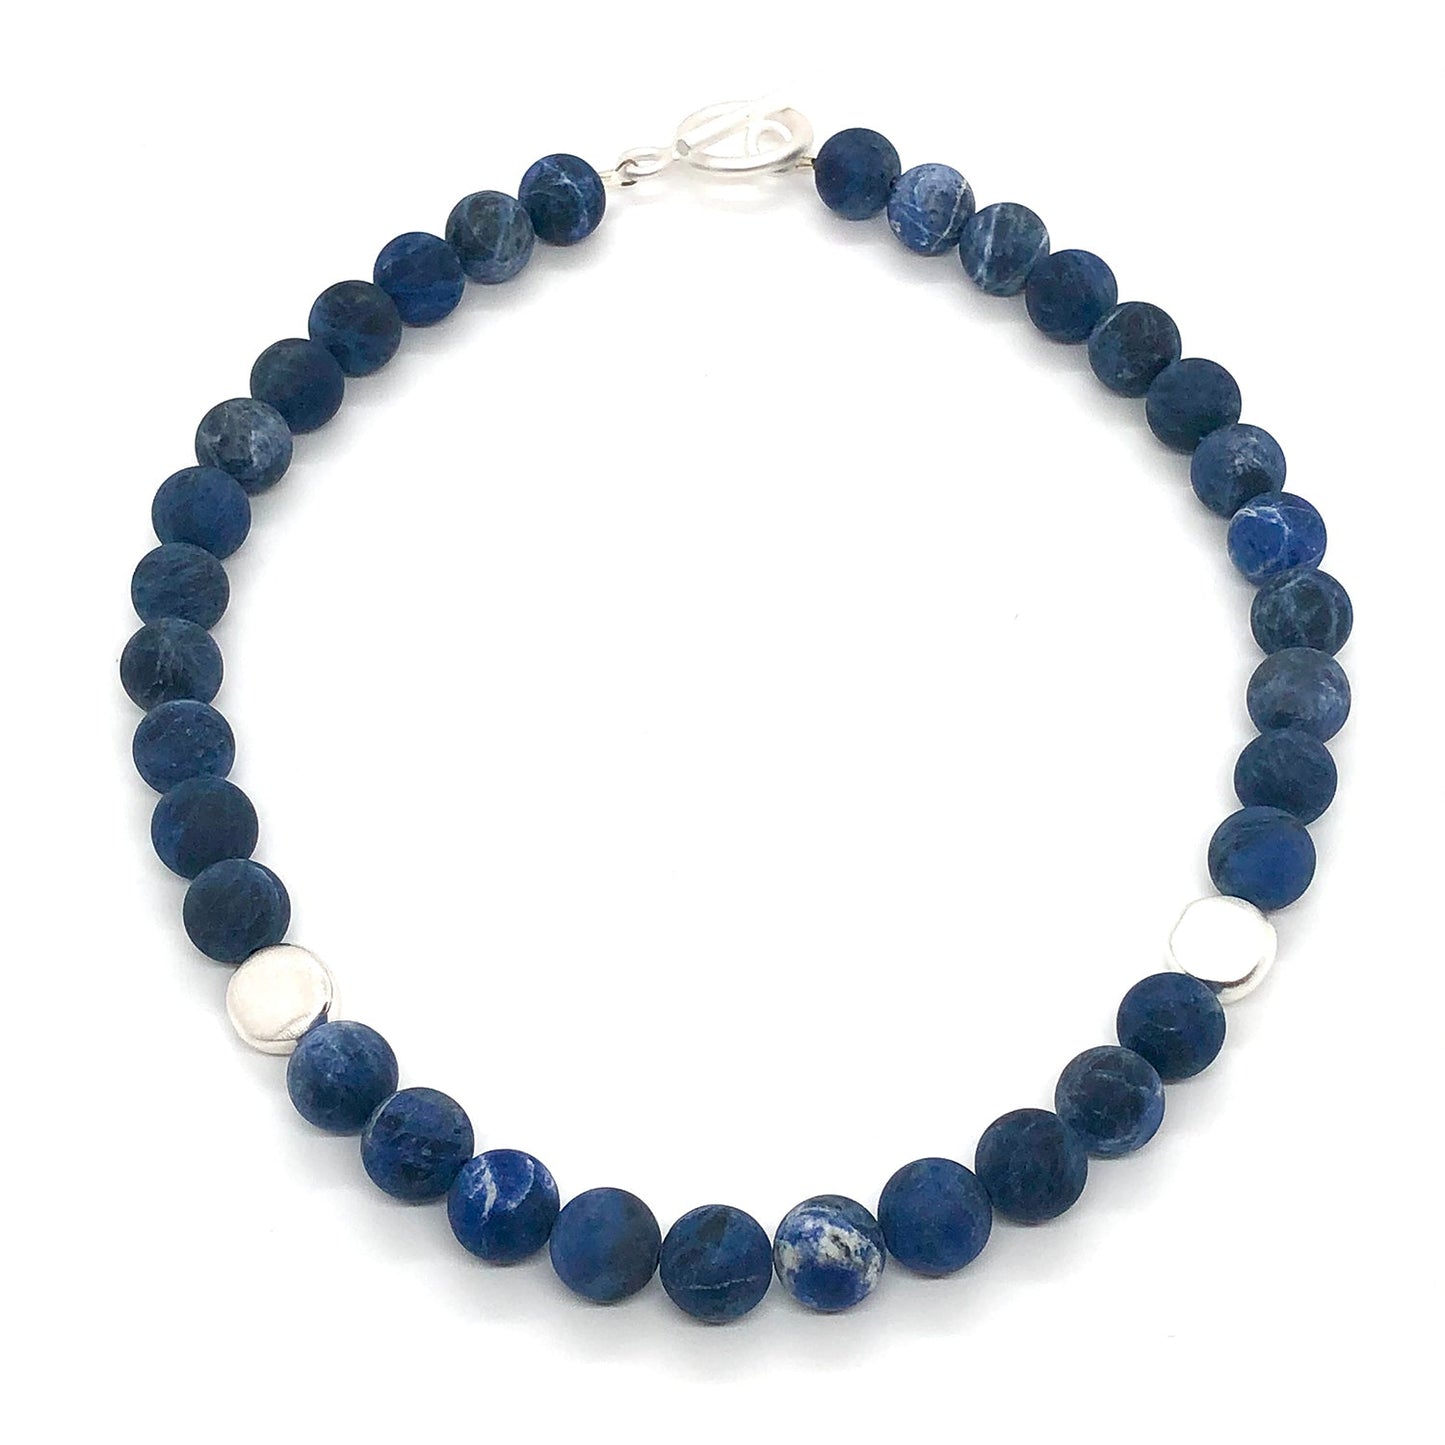 Matte Blue Sodalite With Matte Silver Flat Bead Necklace